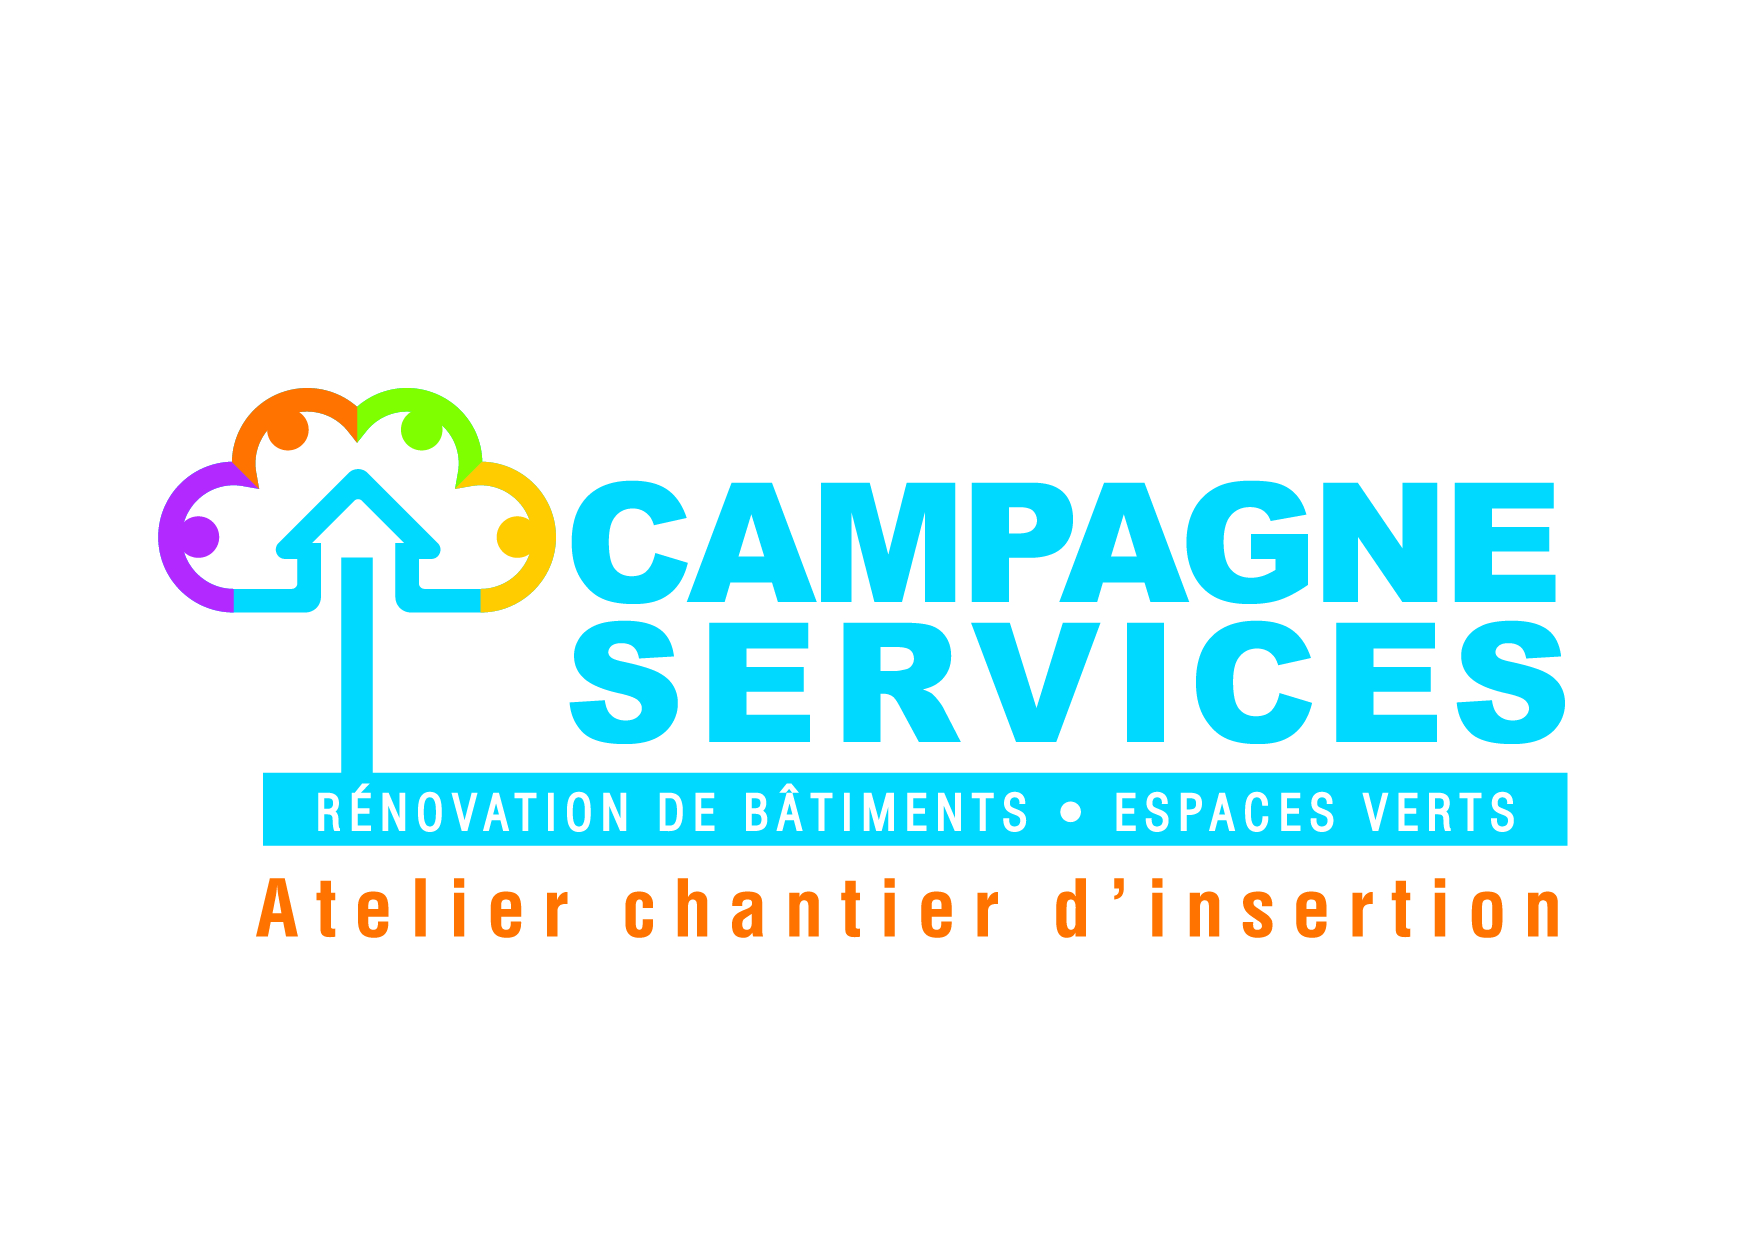 CAMPAGNE SERVICES